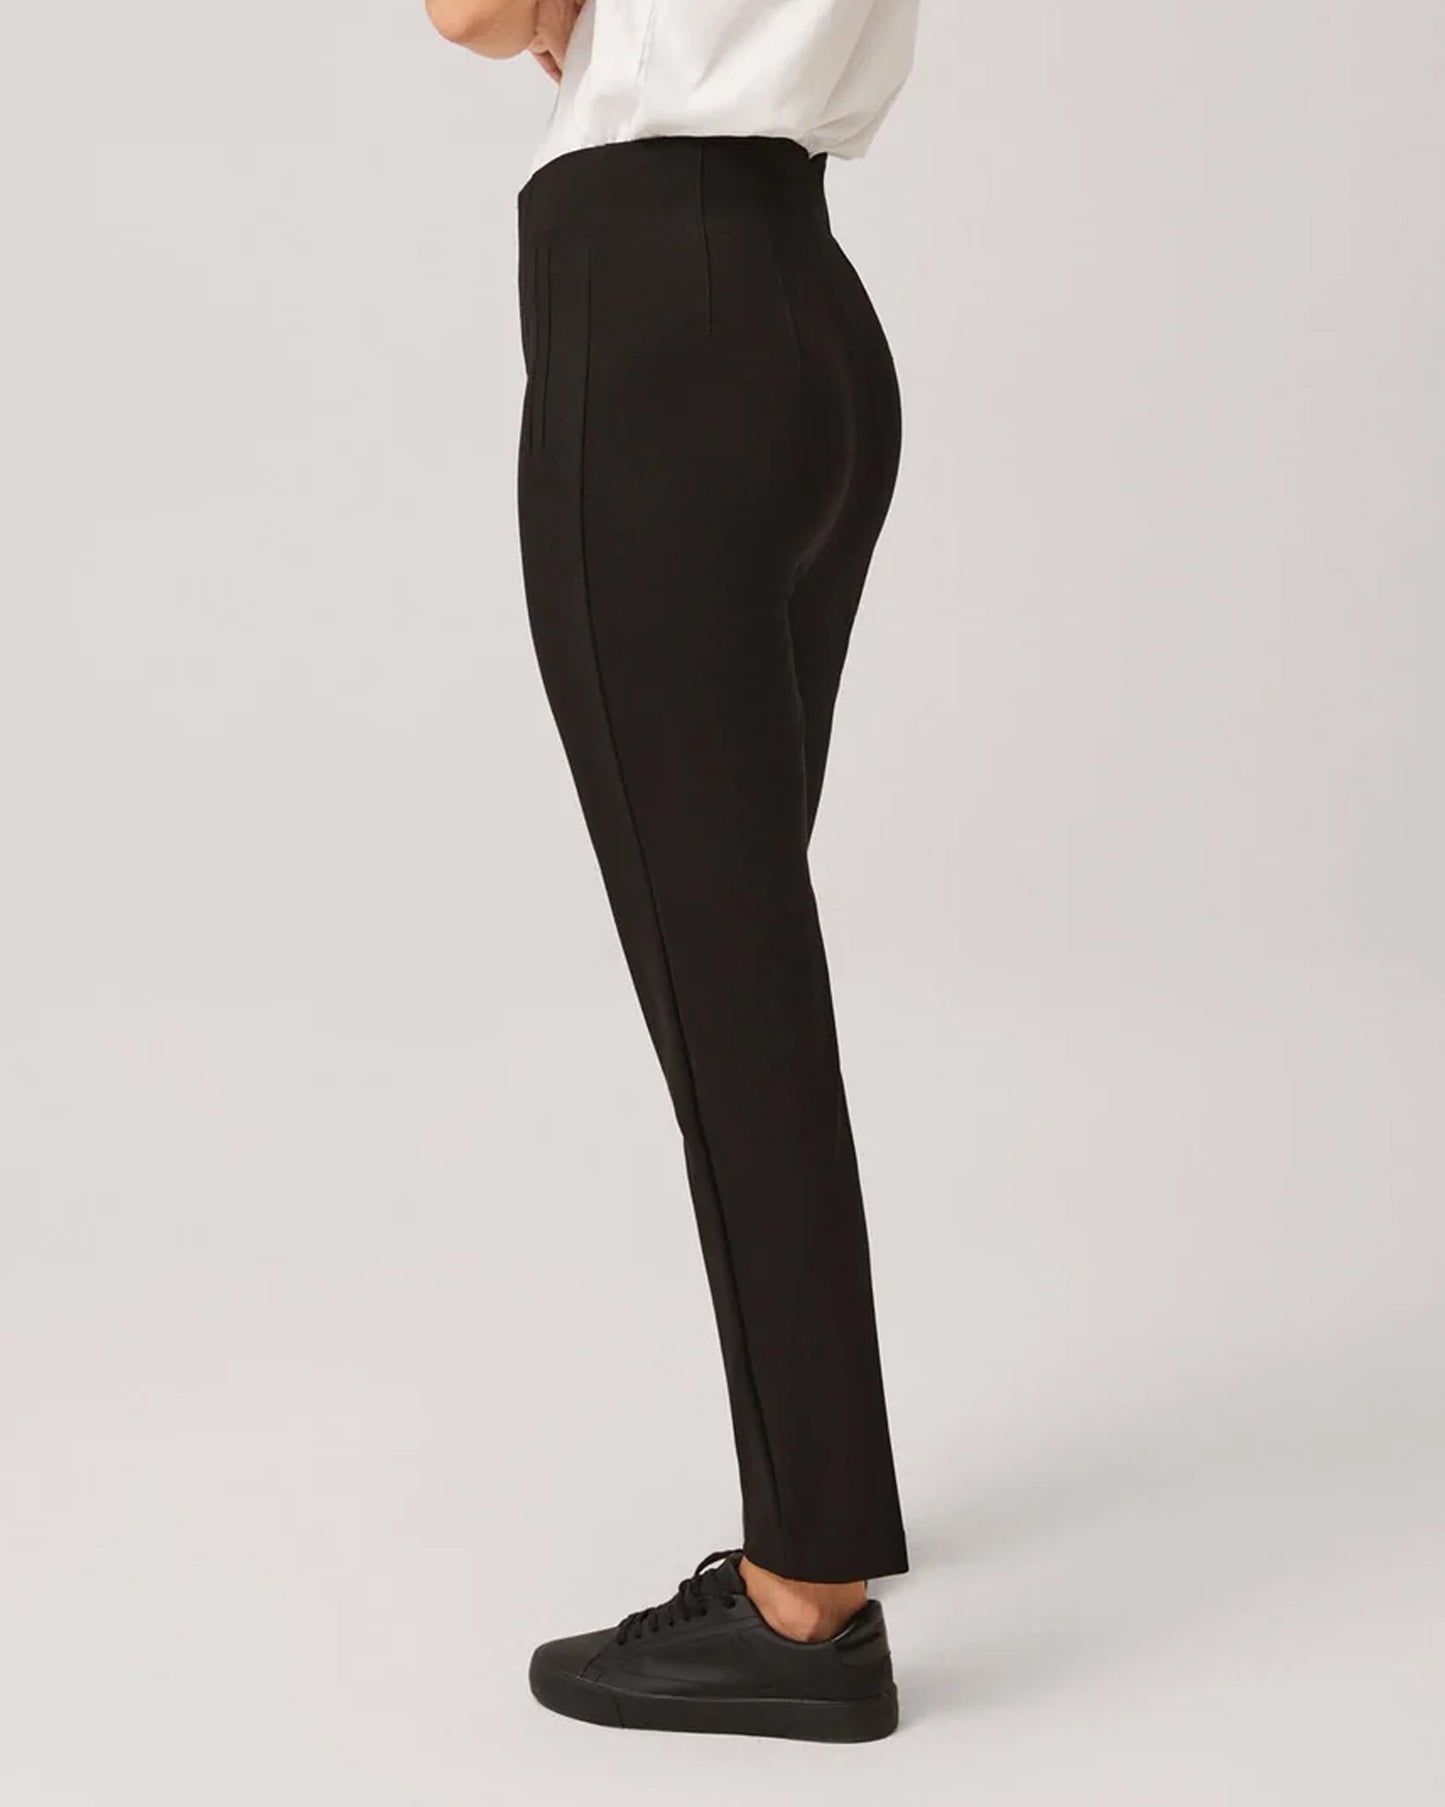 Ysabel Mora 70403 High Waist Trousers - Black suit style high waisted pants with pleated darts, invisible front zipper and button, worn with white t-shirt and black sneakers.